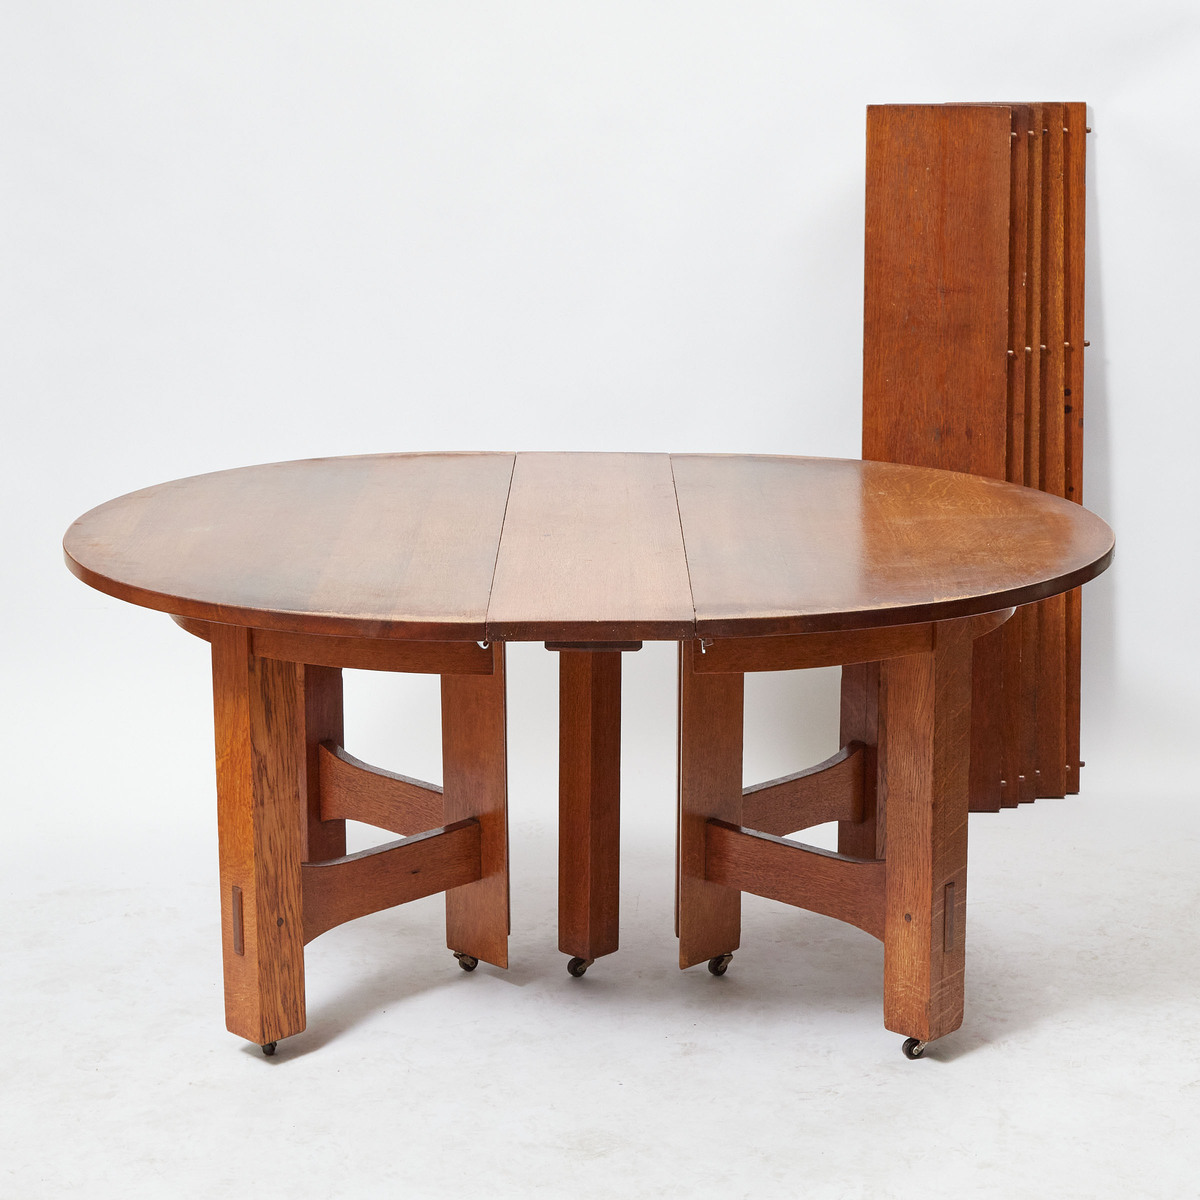 Gustav Stickley Model 634 Mission Oak Arts and Crafts Extension Dining Table, c.1912, height 30 in — - Image 3 of 3